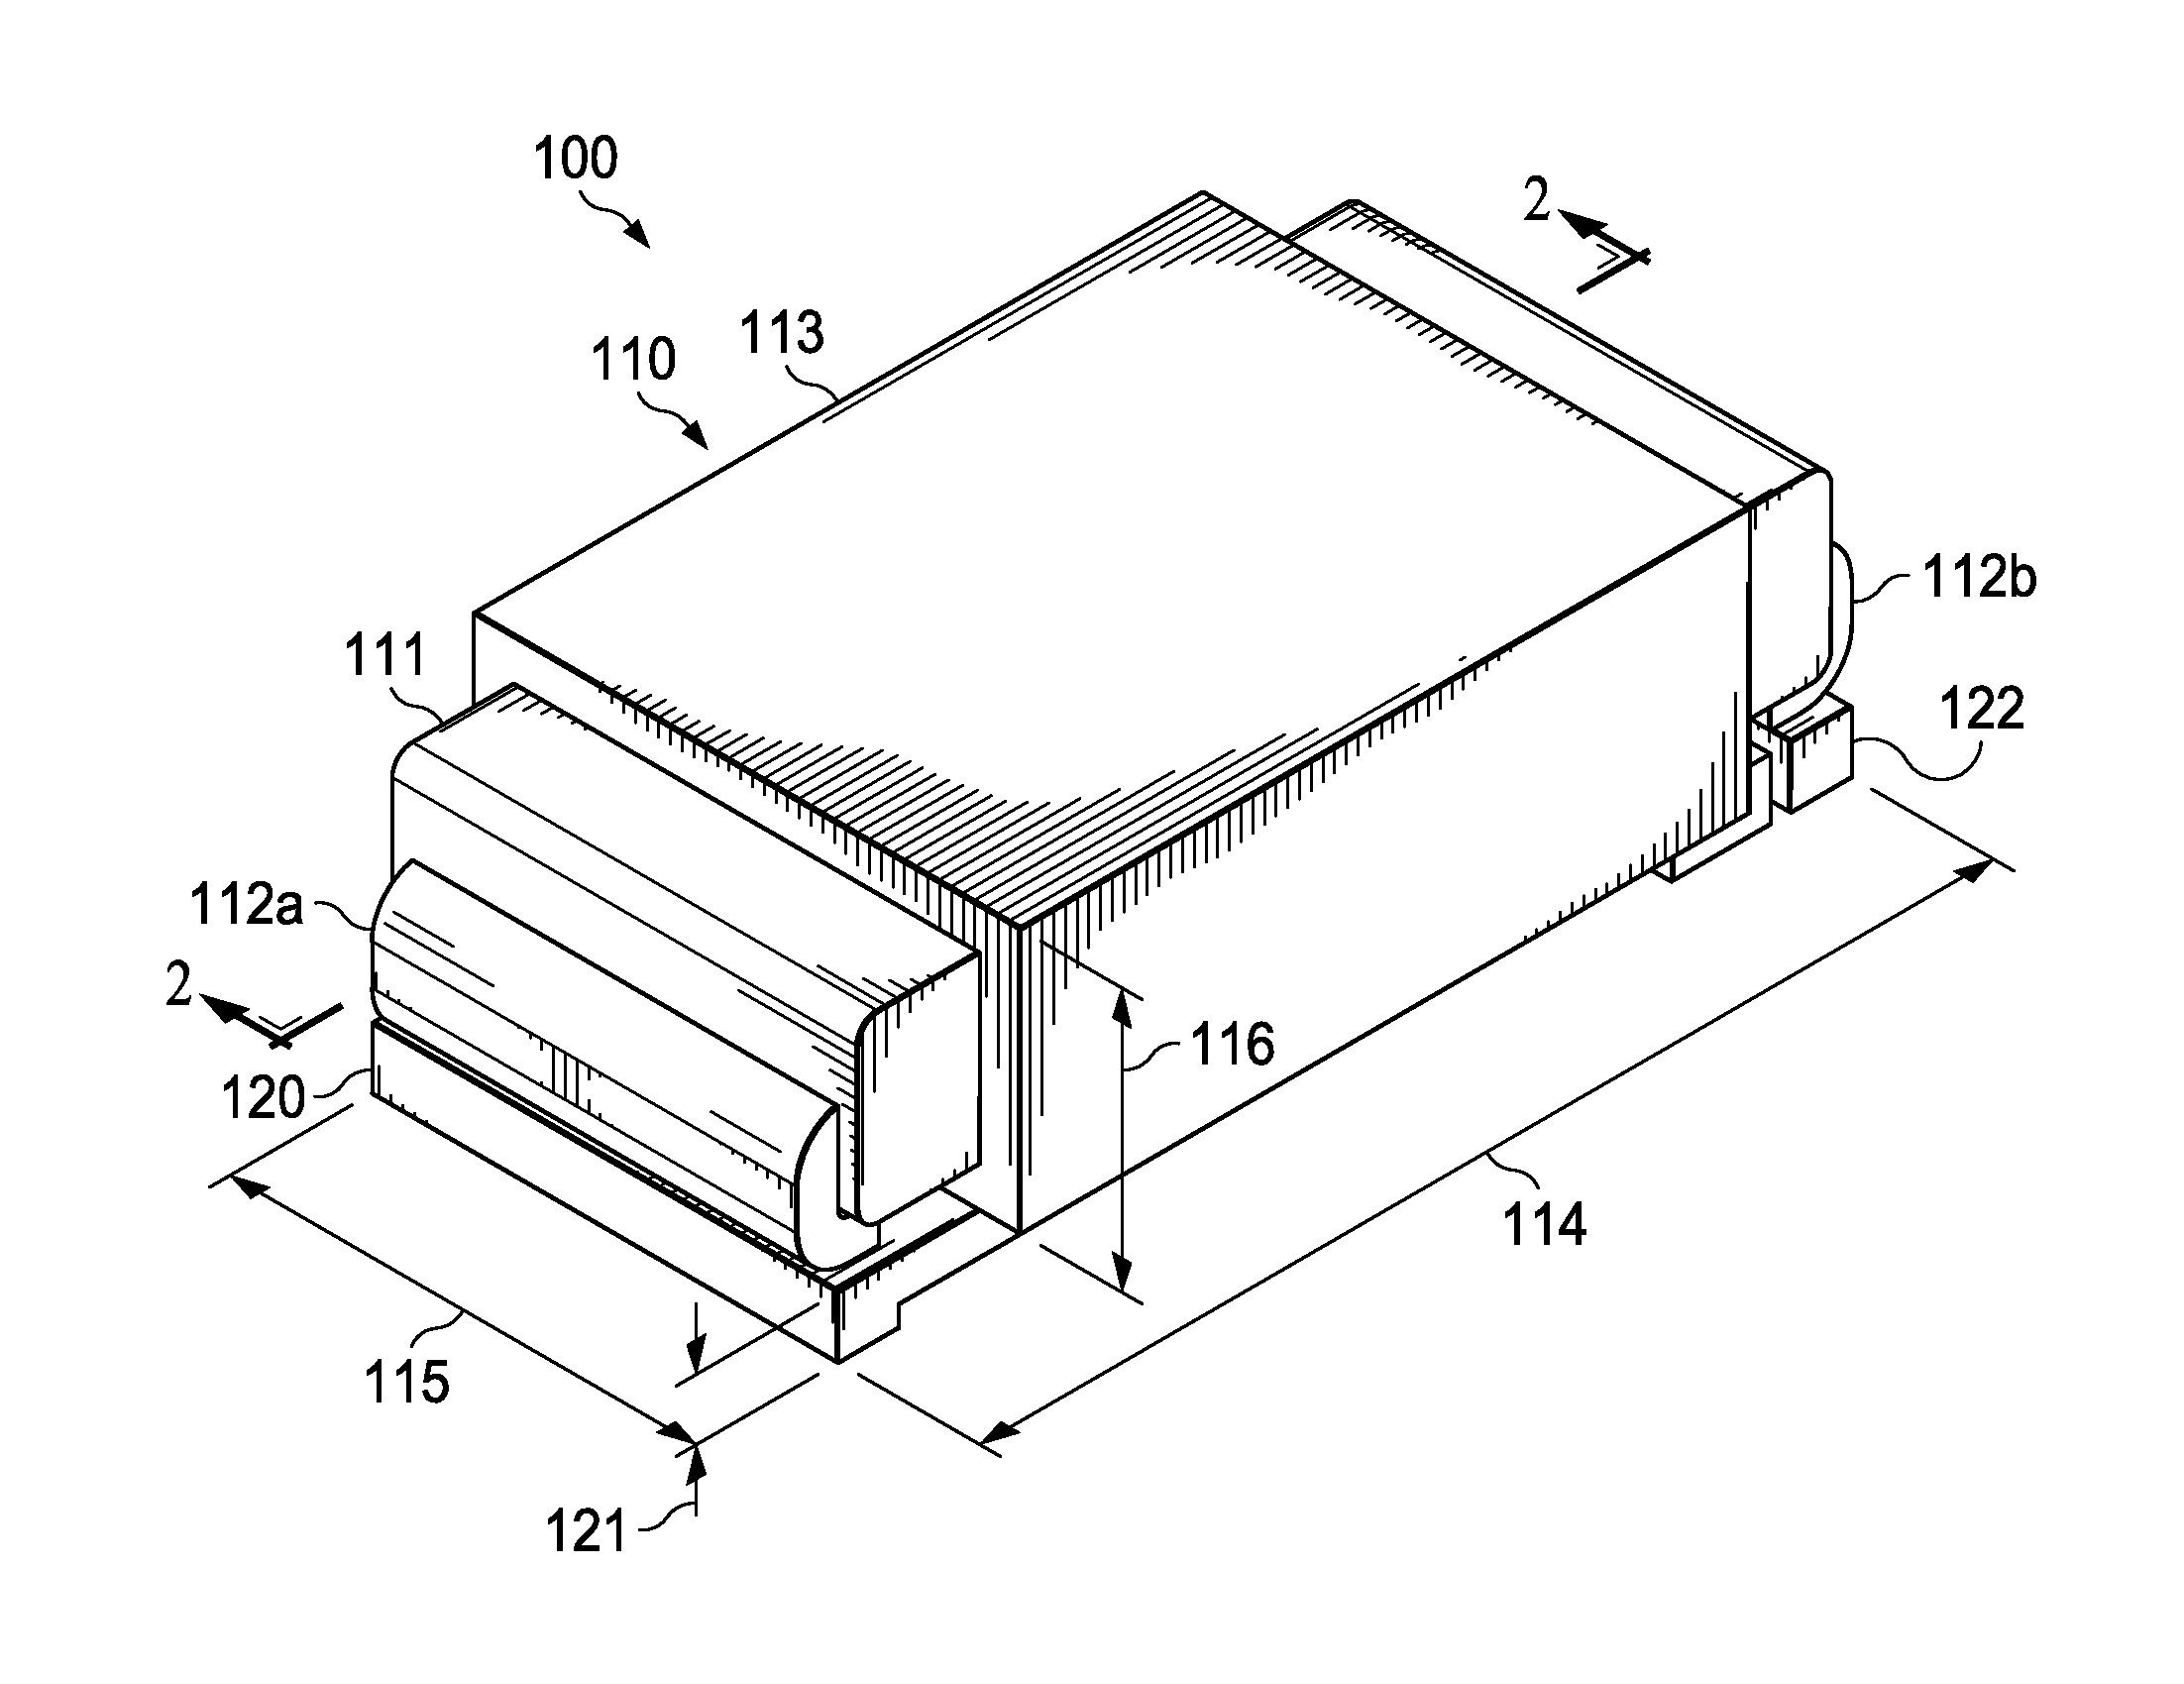 DC-DC converter vertically integrated with load inductor structured as heat sink